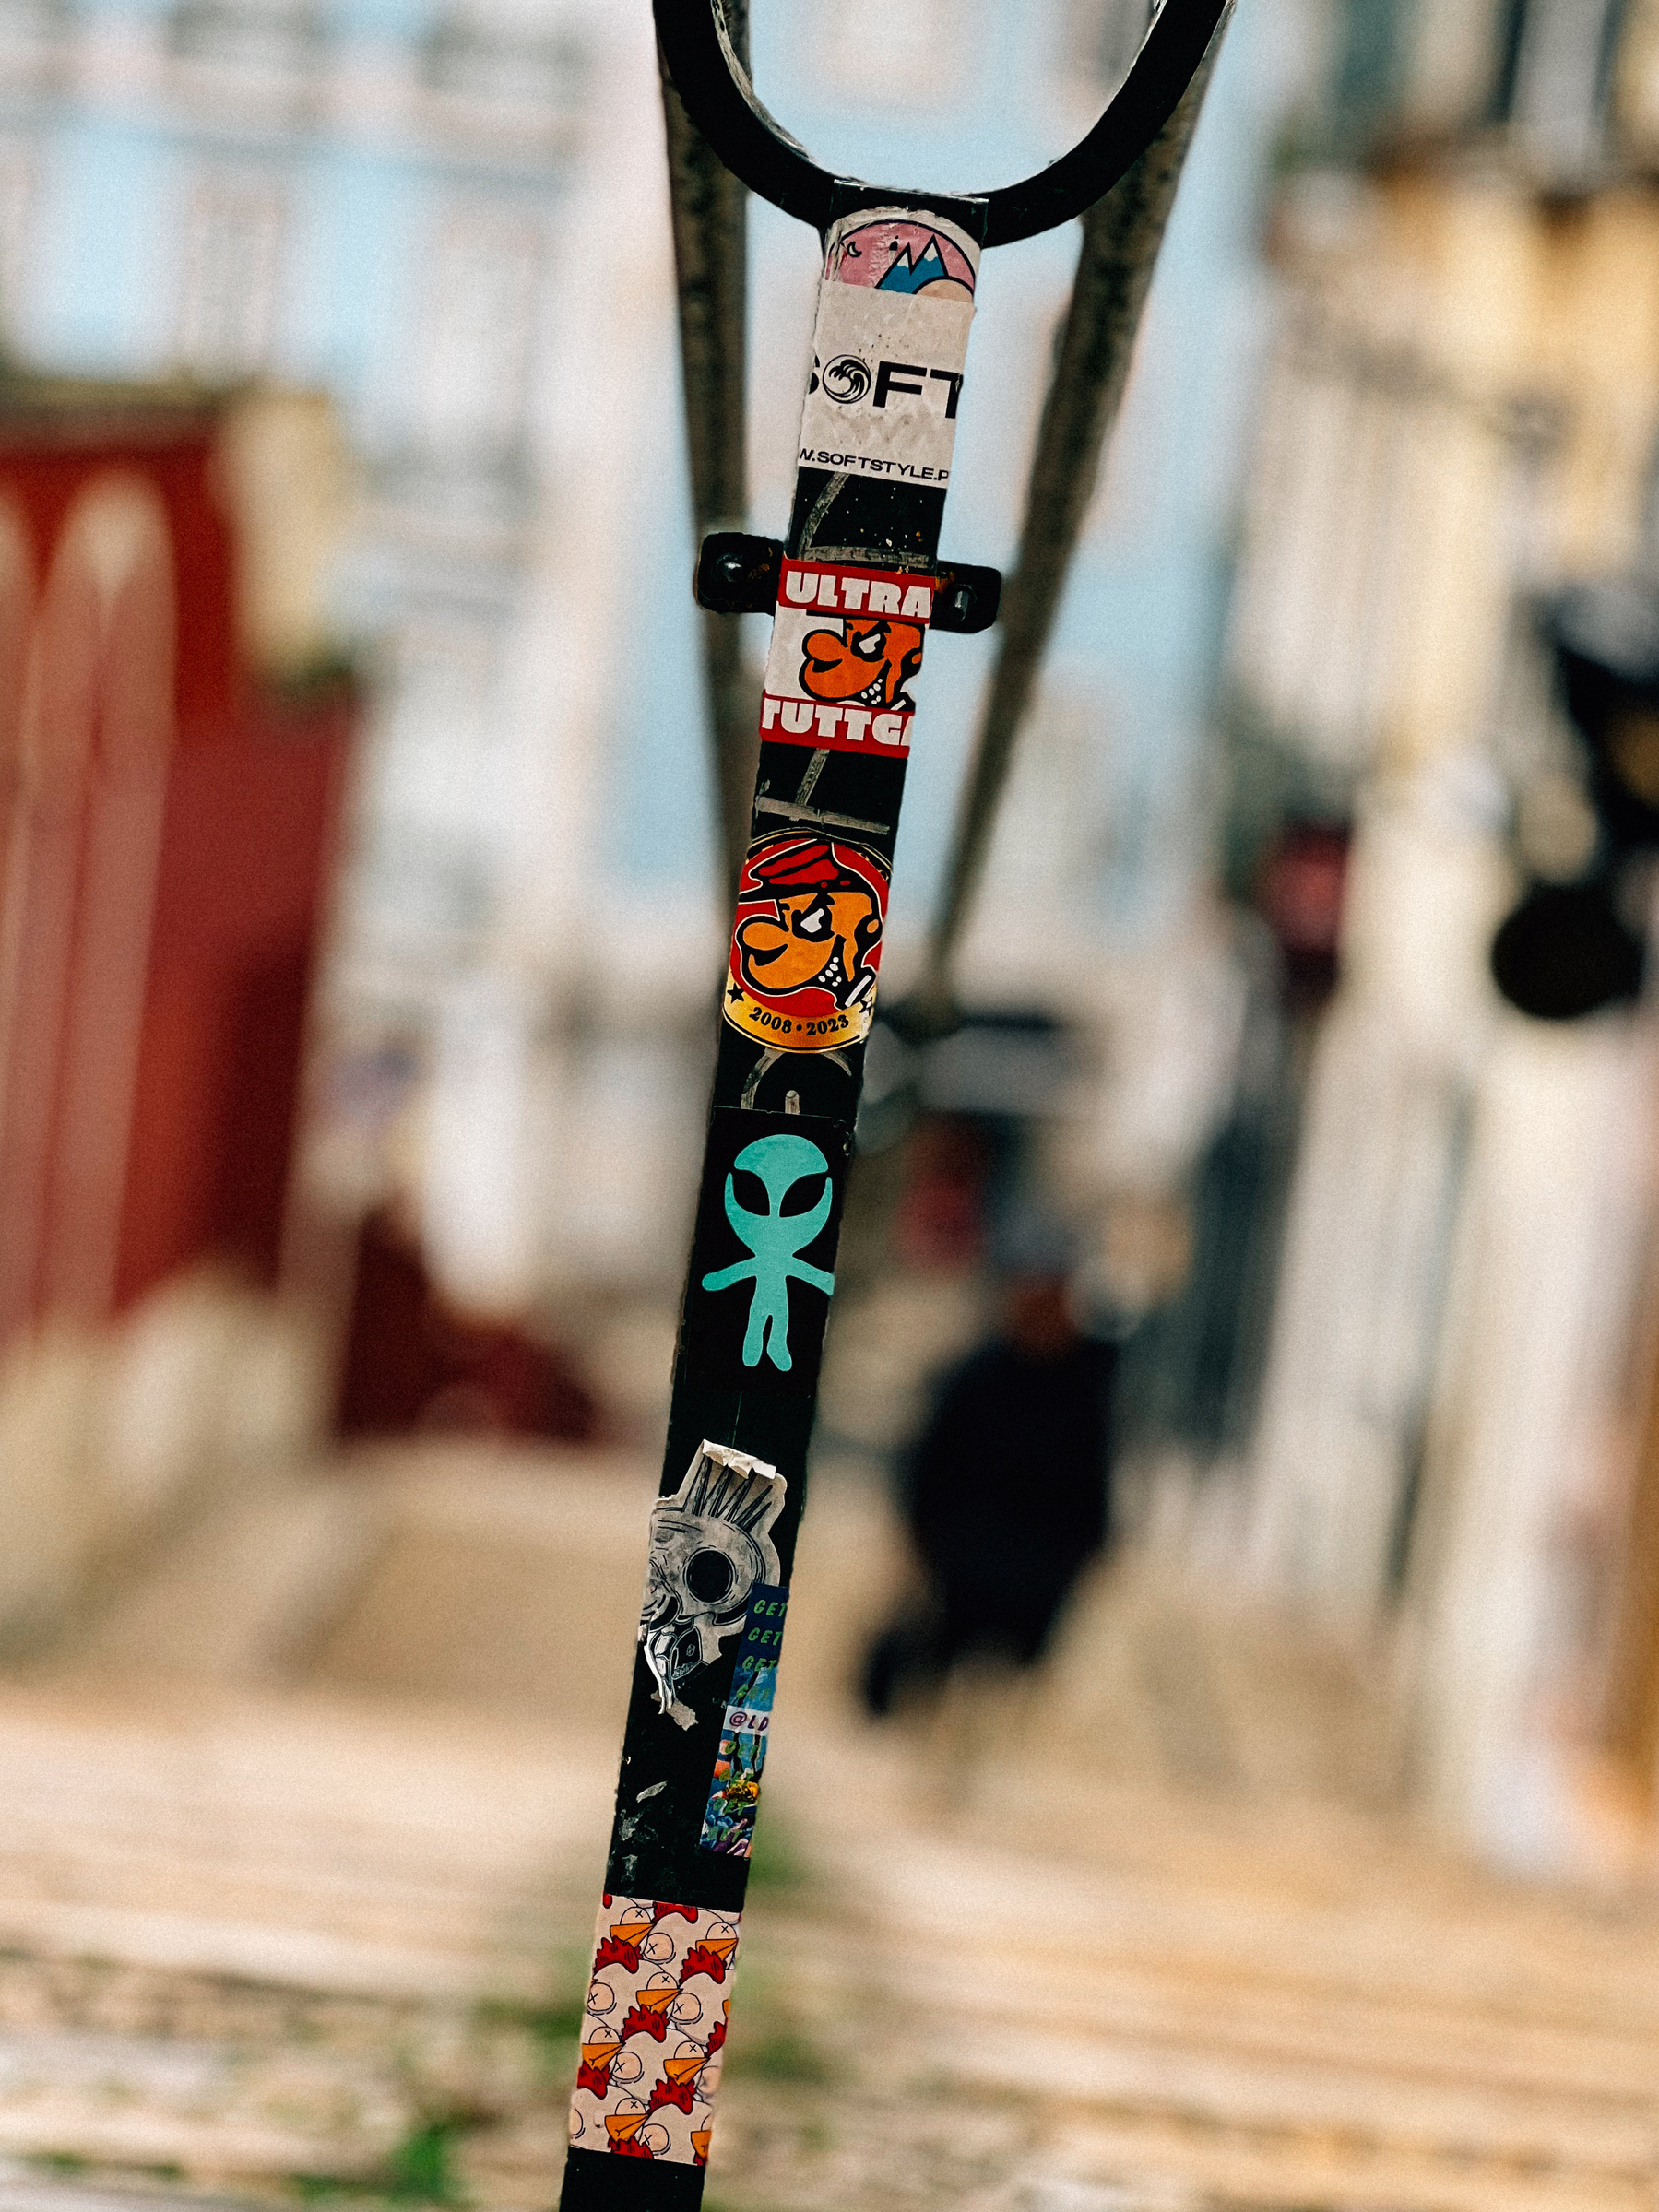 A close-up of a street pole covered in various stickers, with a blurred urban background.